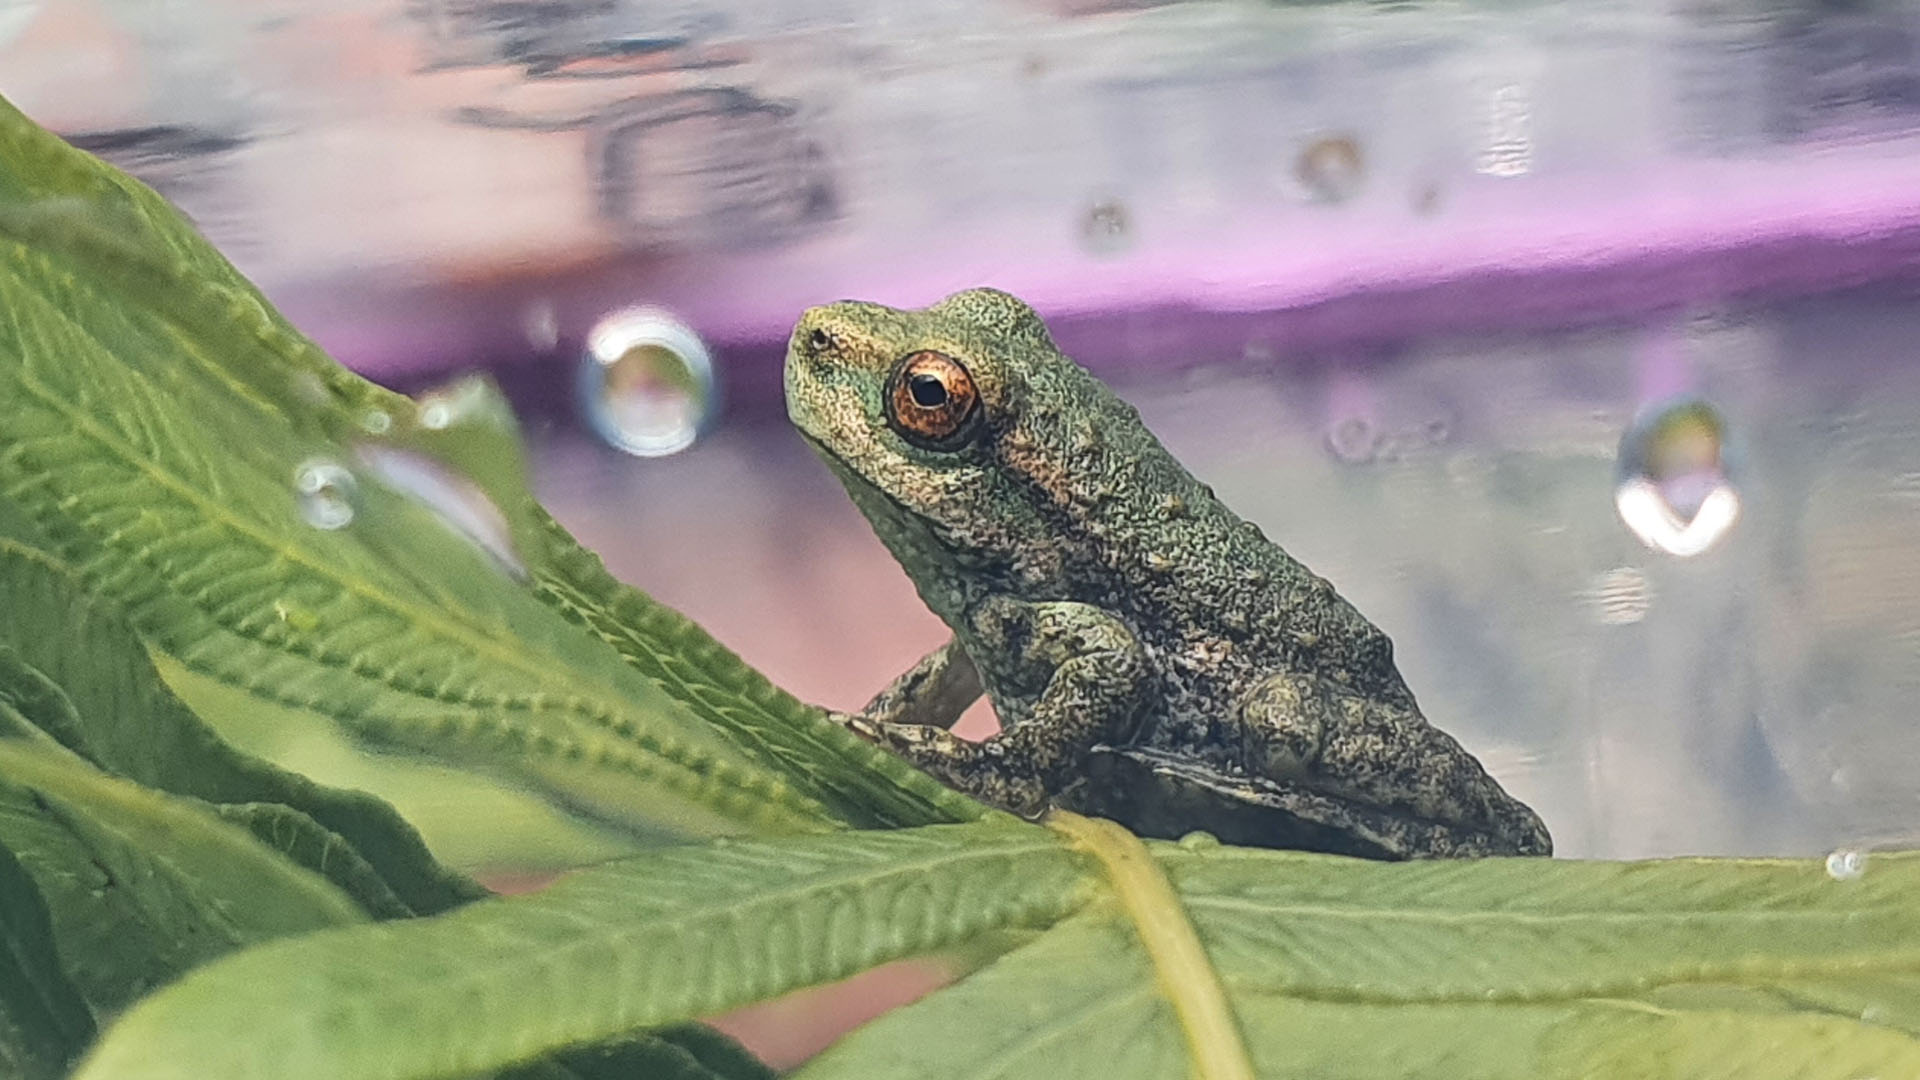 Endangered frogs collected from fire impacted areas for safekeeping